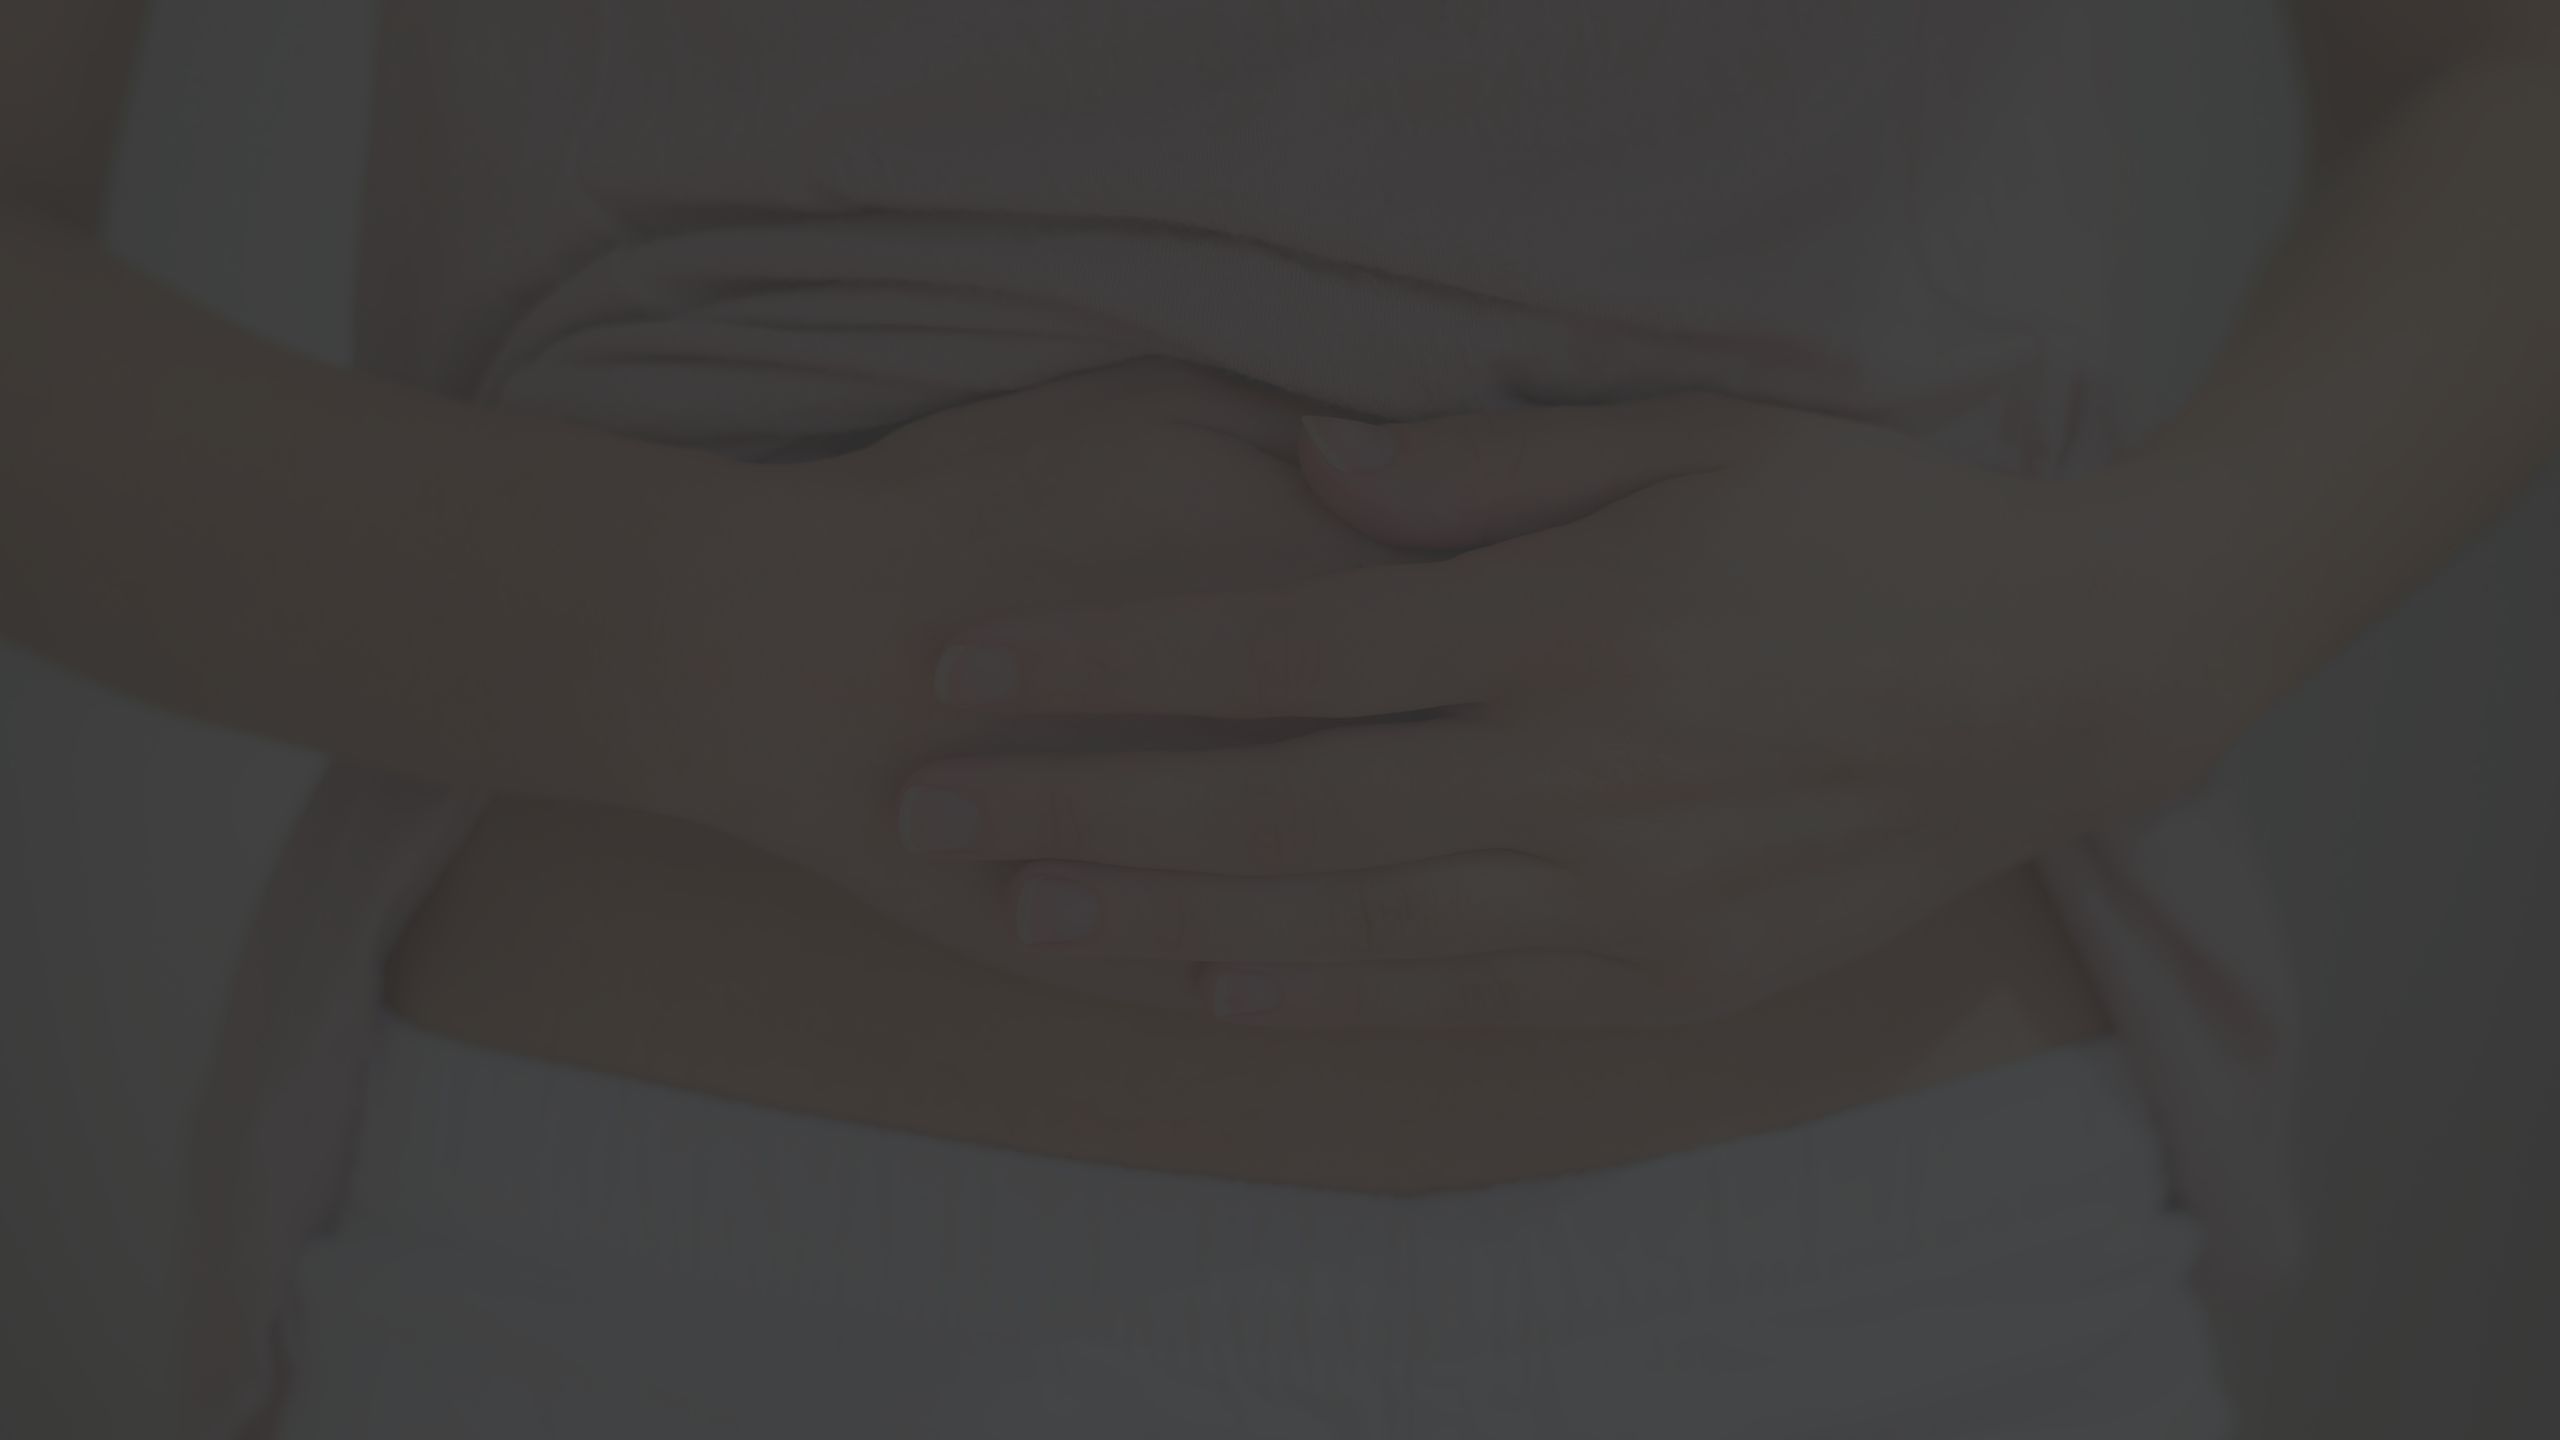 Close up shot of someone placing their hands over their lower abdomen